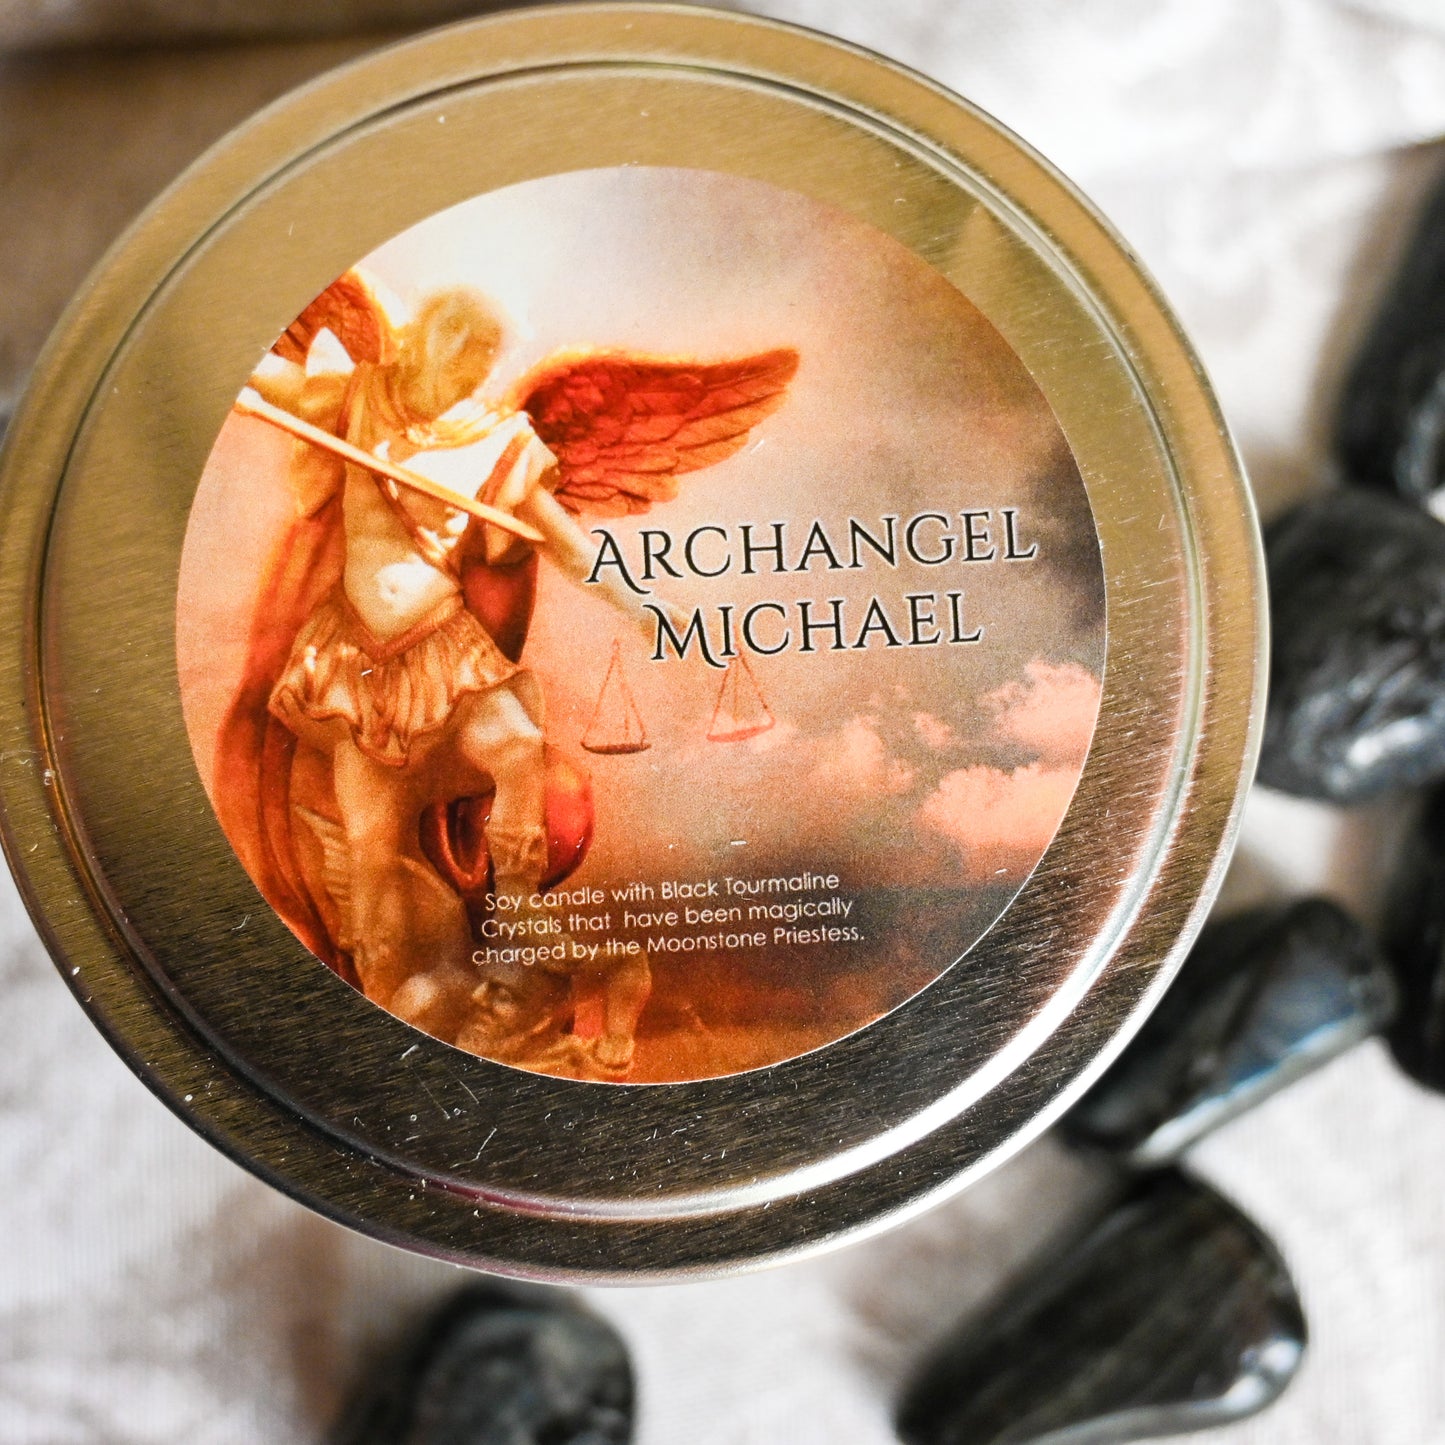 Archangel Michael Magical Candle with Black Tourmaline Crystals Travel Tin